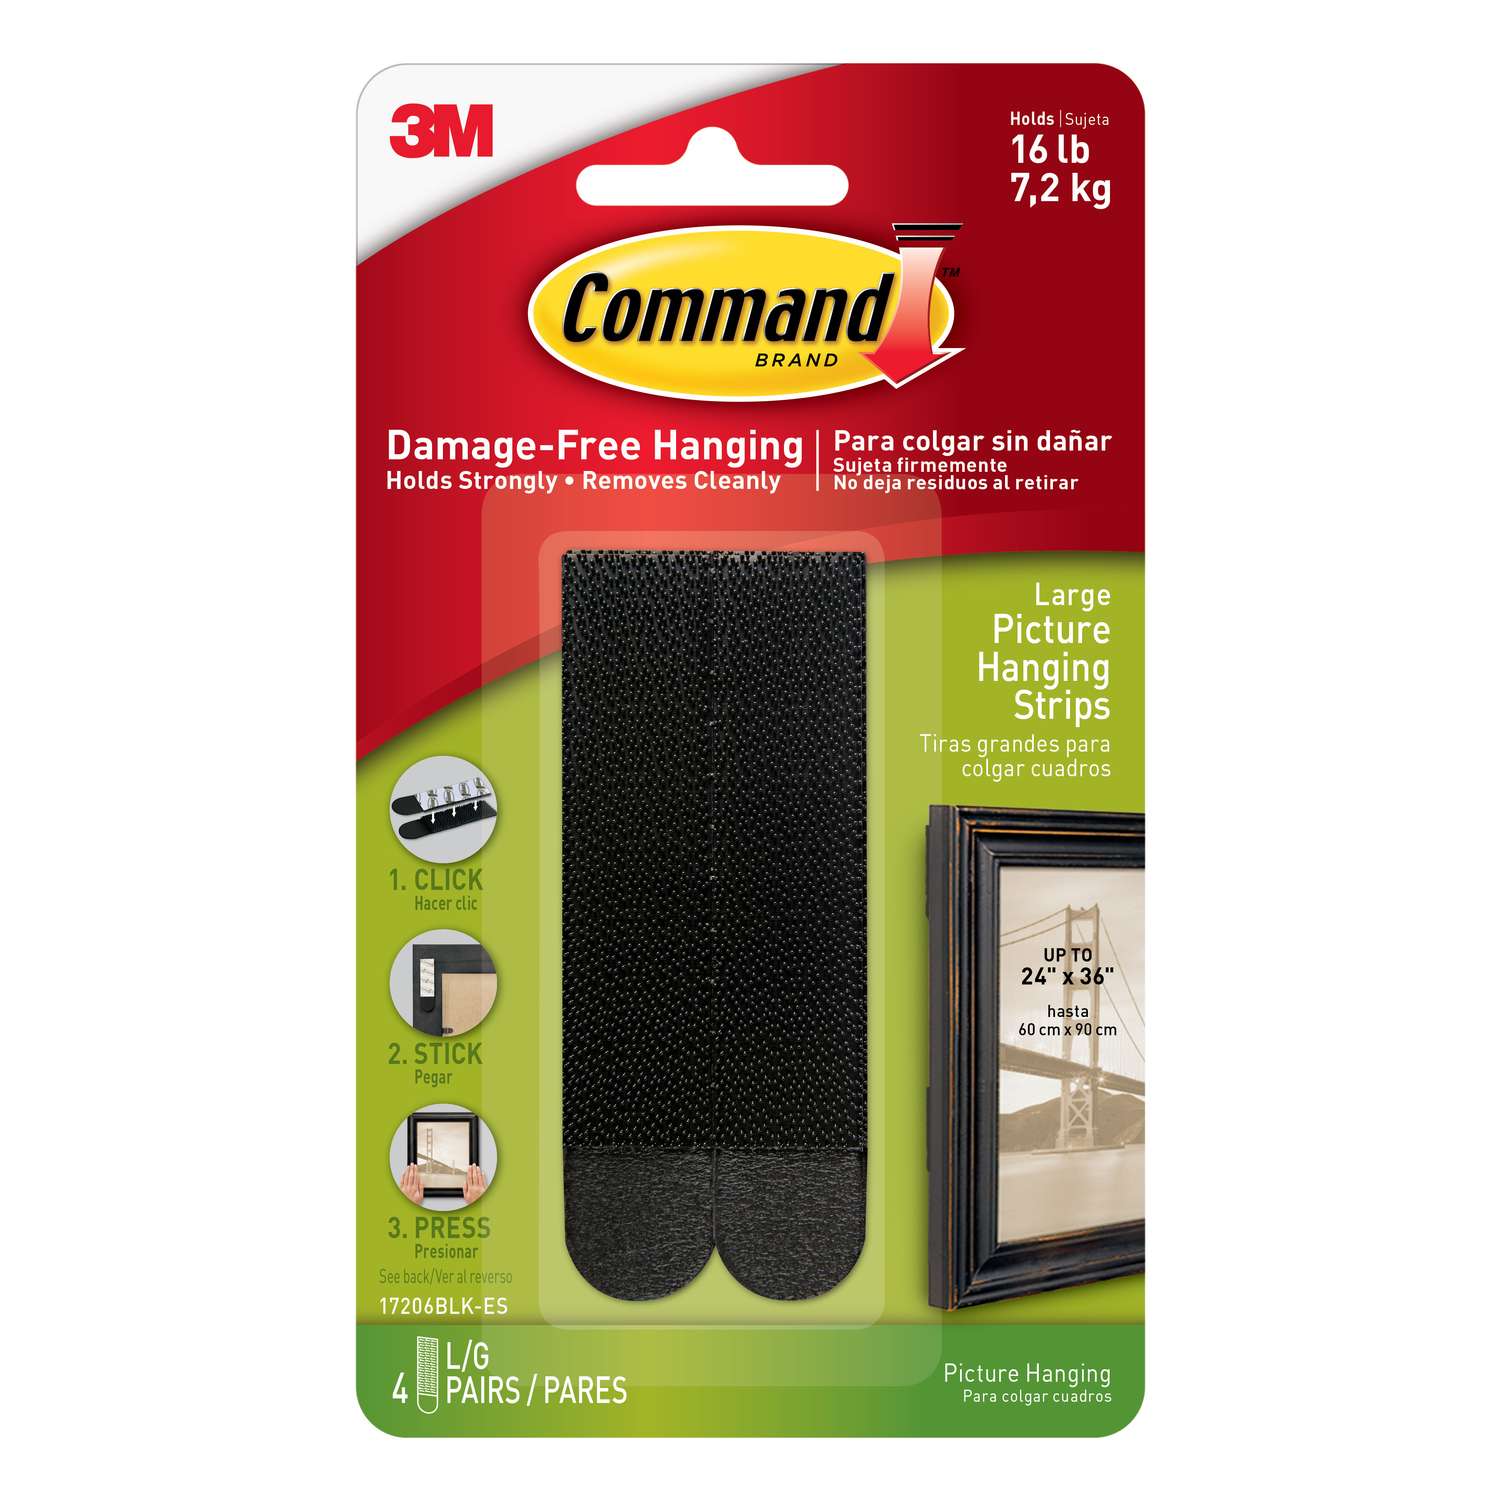 Command Large Adhesive Picture Hanging Strips Value Pack, White, 16-lbs,  12-pk